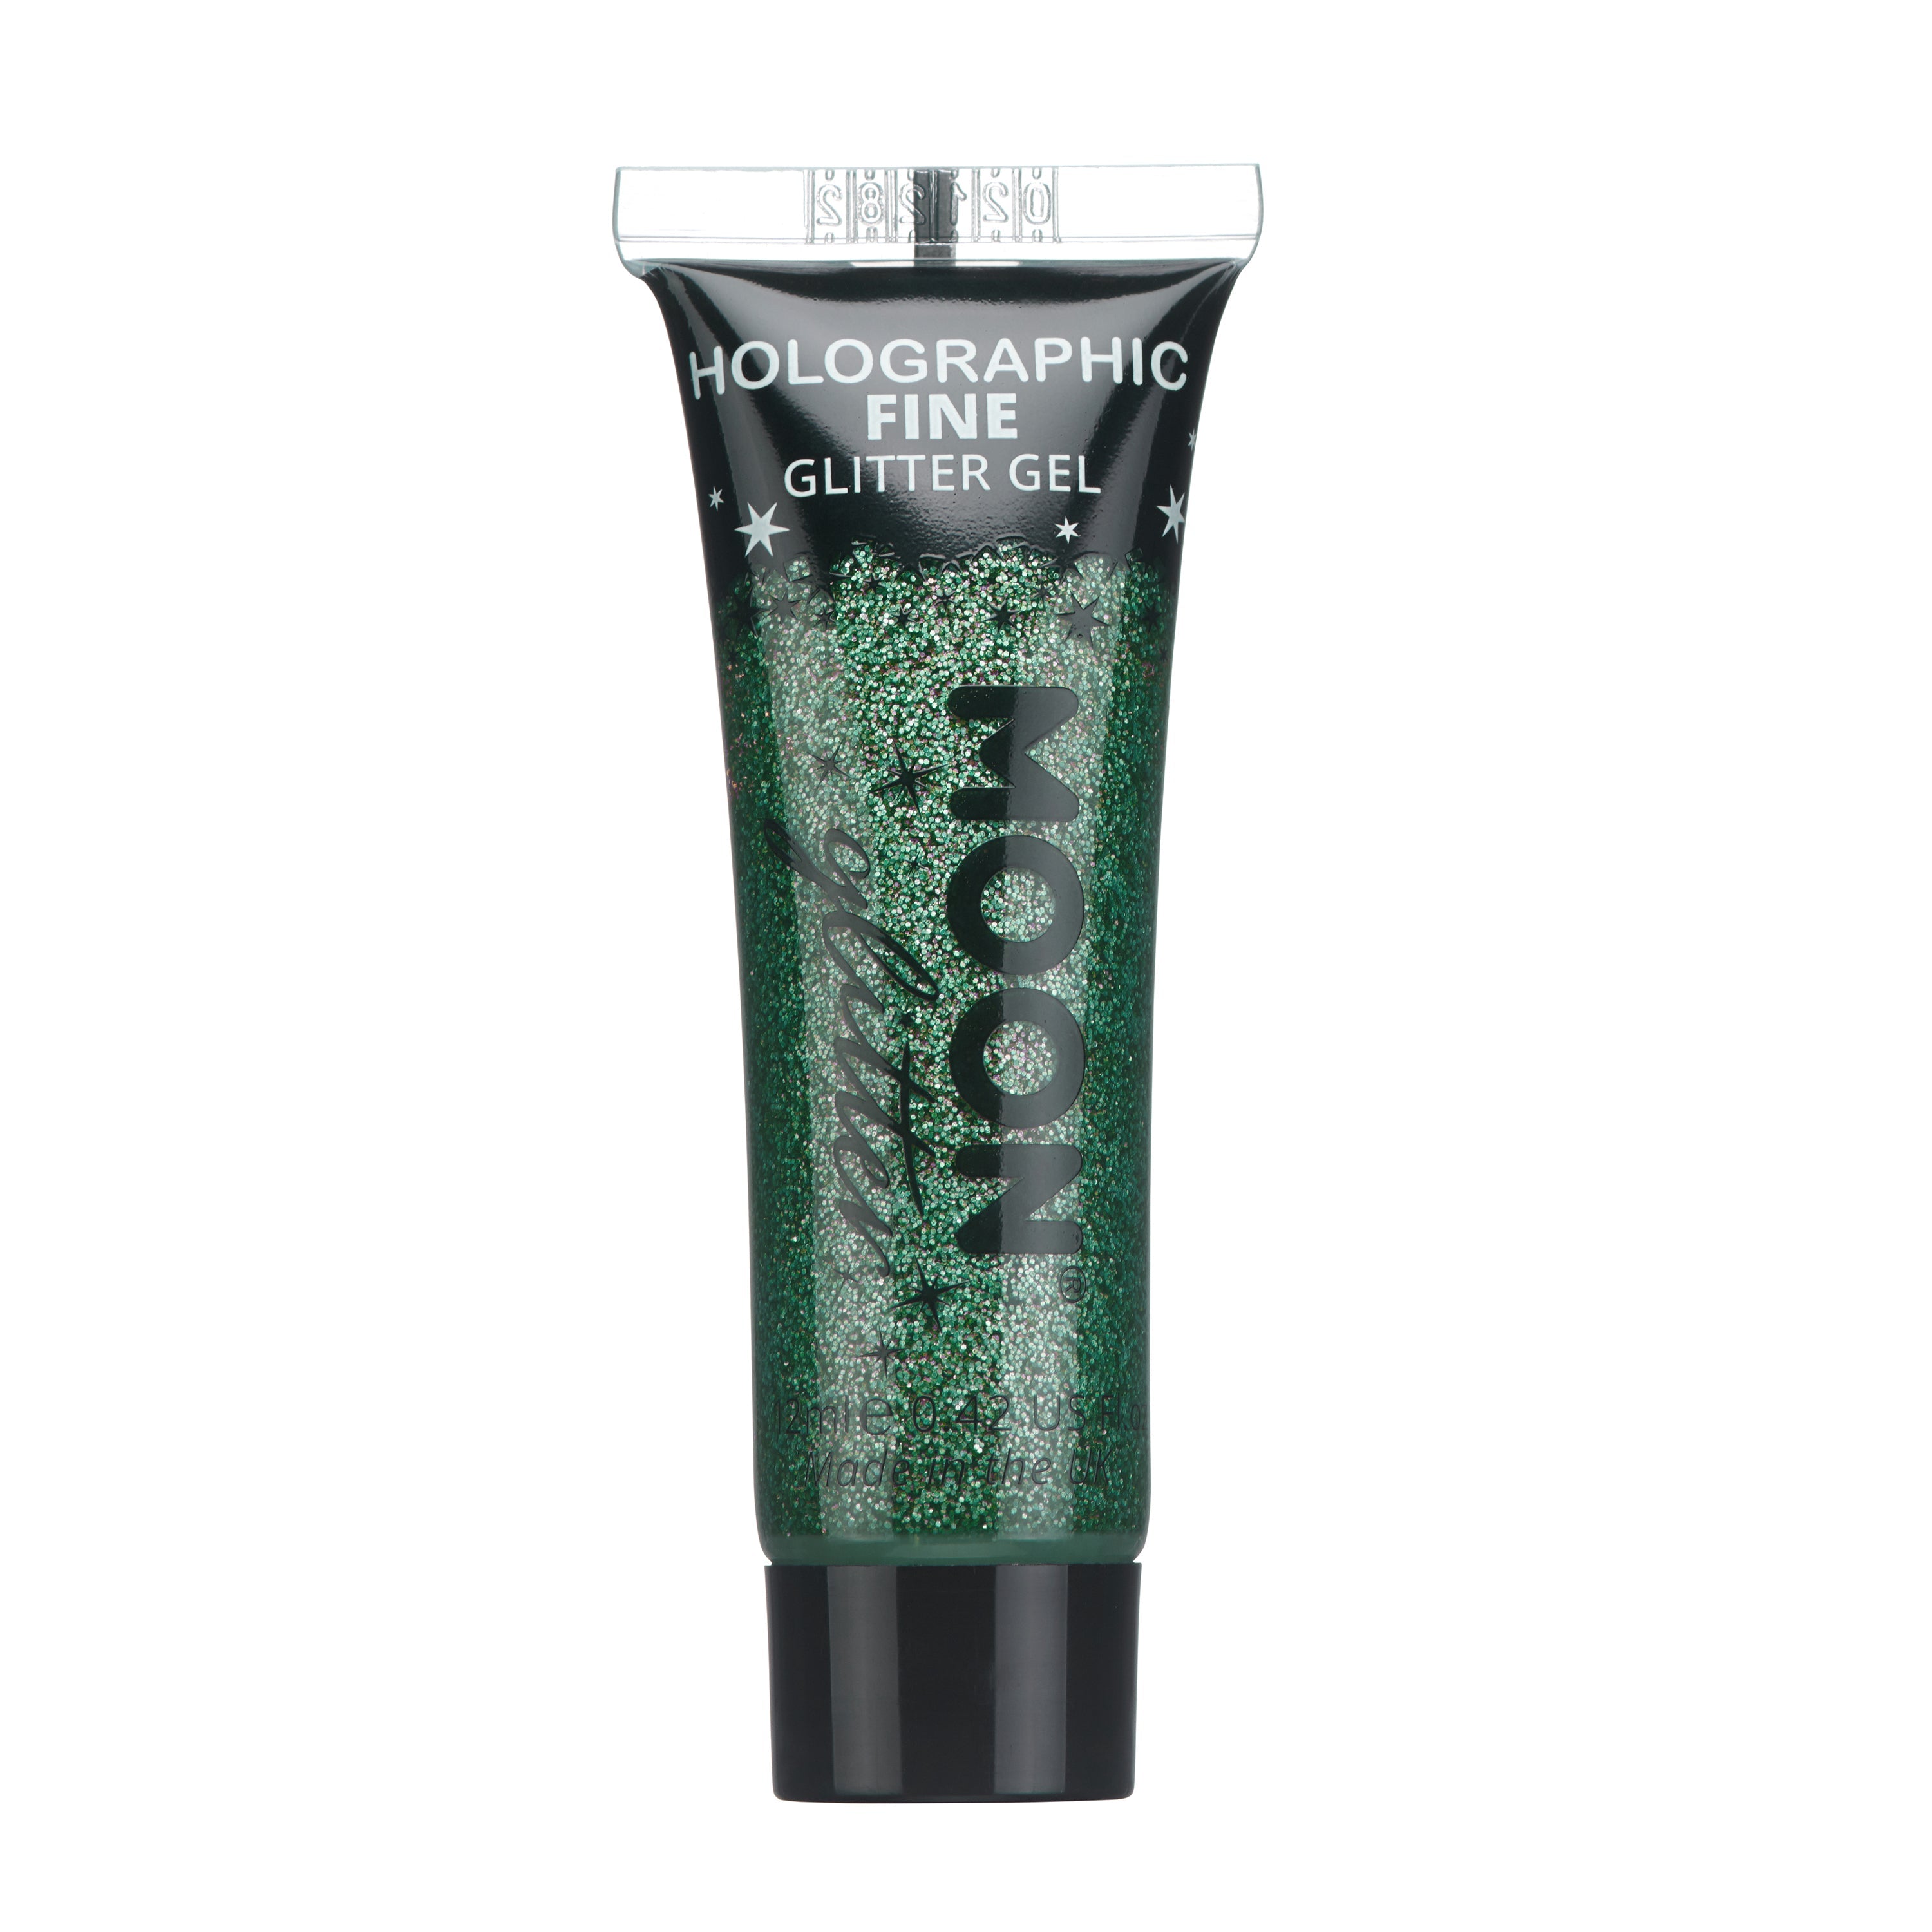 Green - Holographic Fine Face & Body Glitter Gel, 12mL. Cosmetically certified, FDA & Health Canada compliant, cruelty free and vegan.